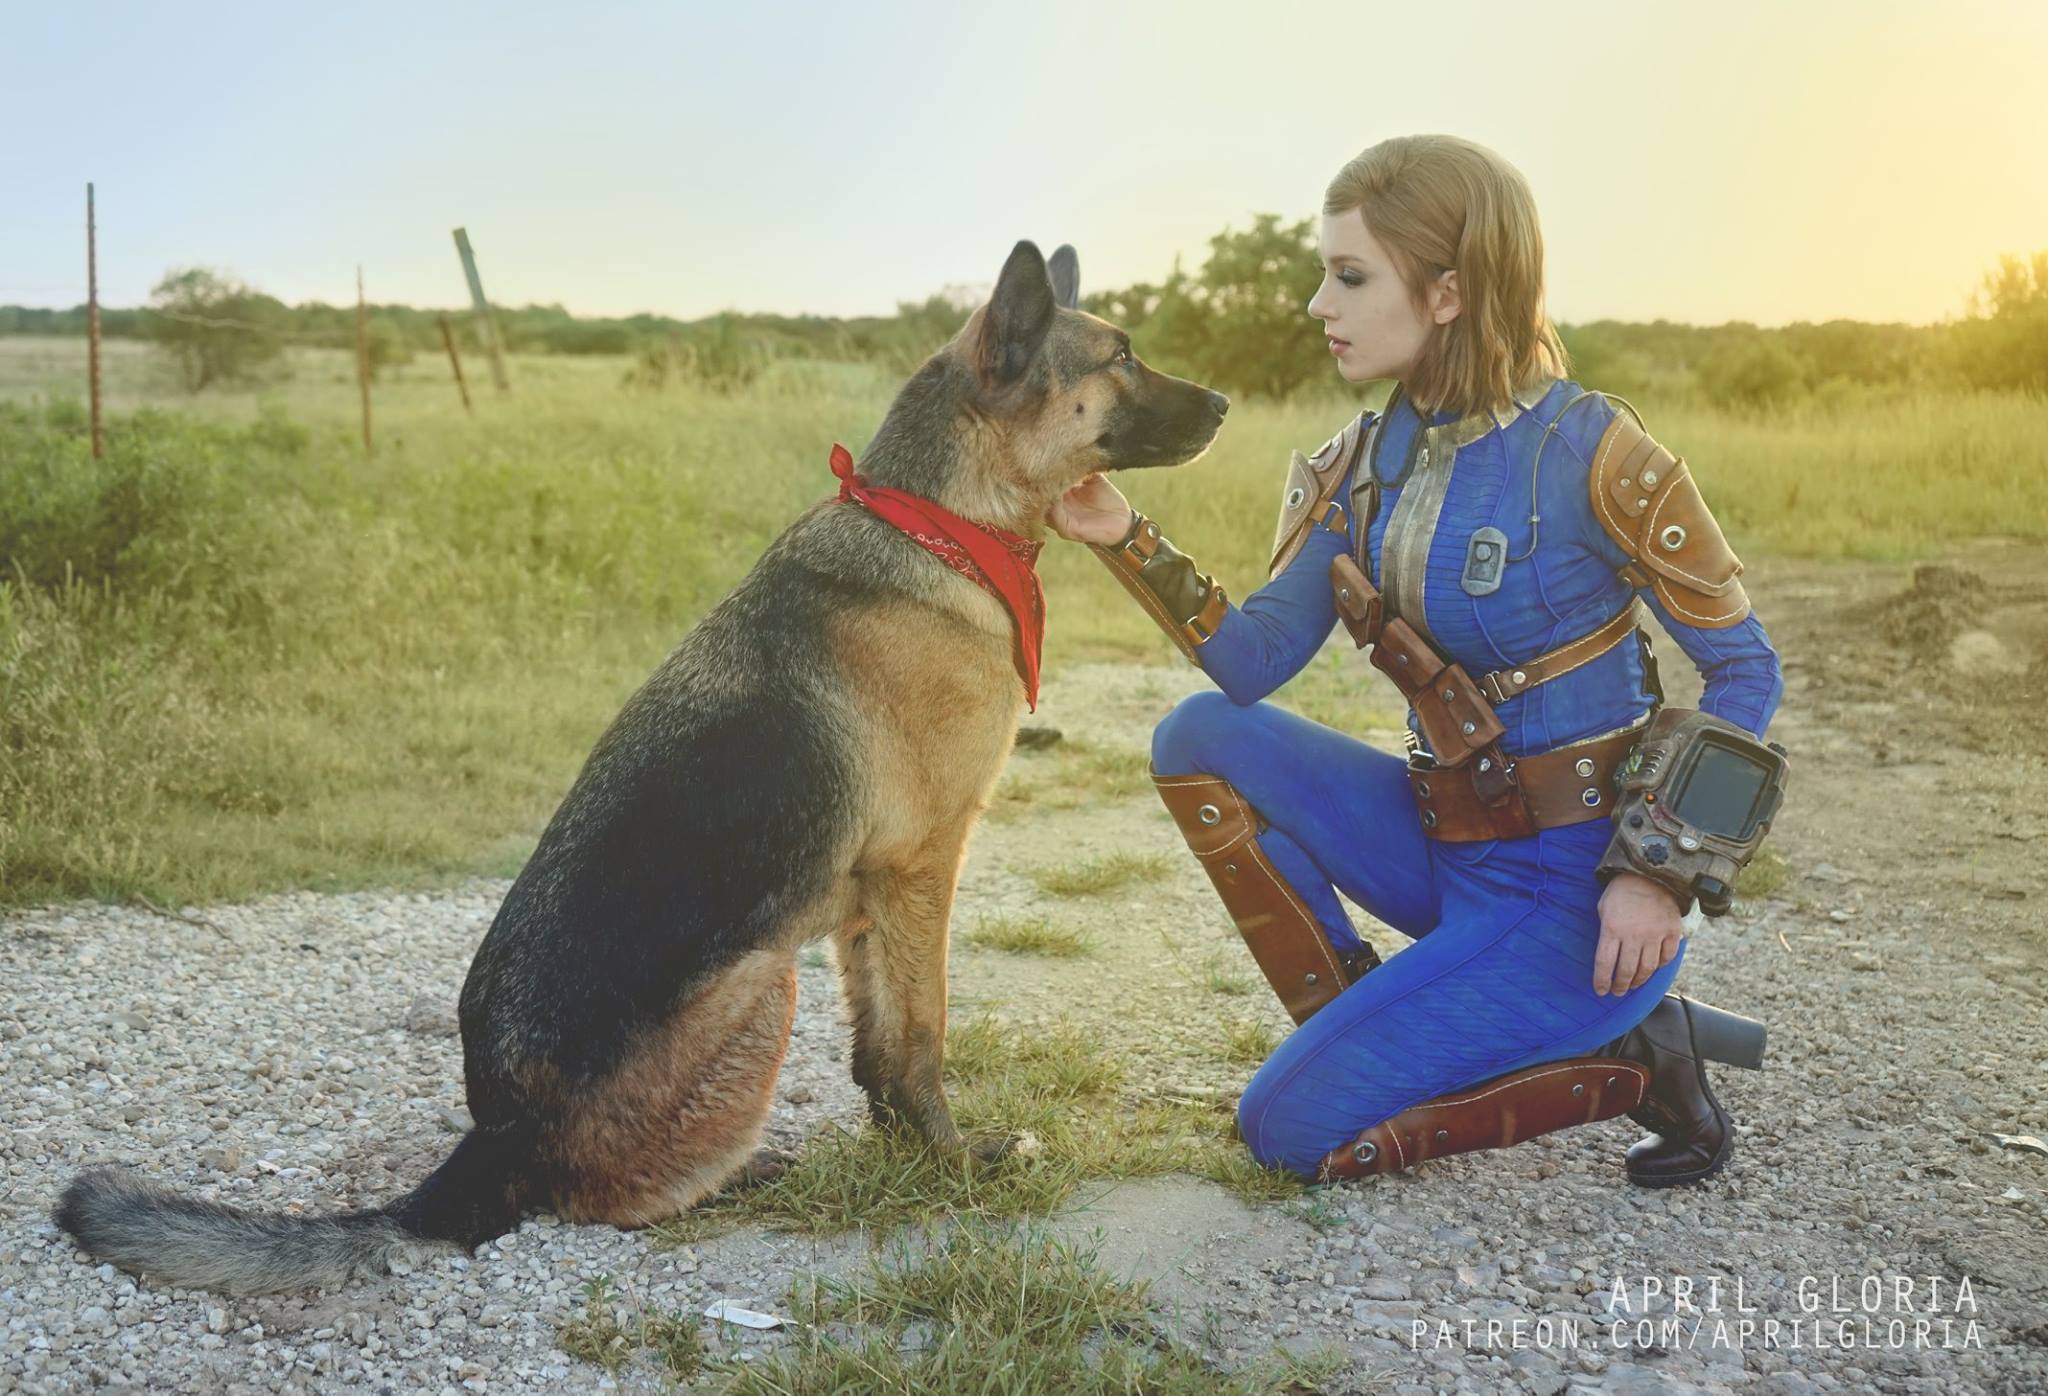 april-gloria-fallout4-picture-cosplay-great